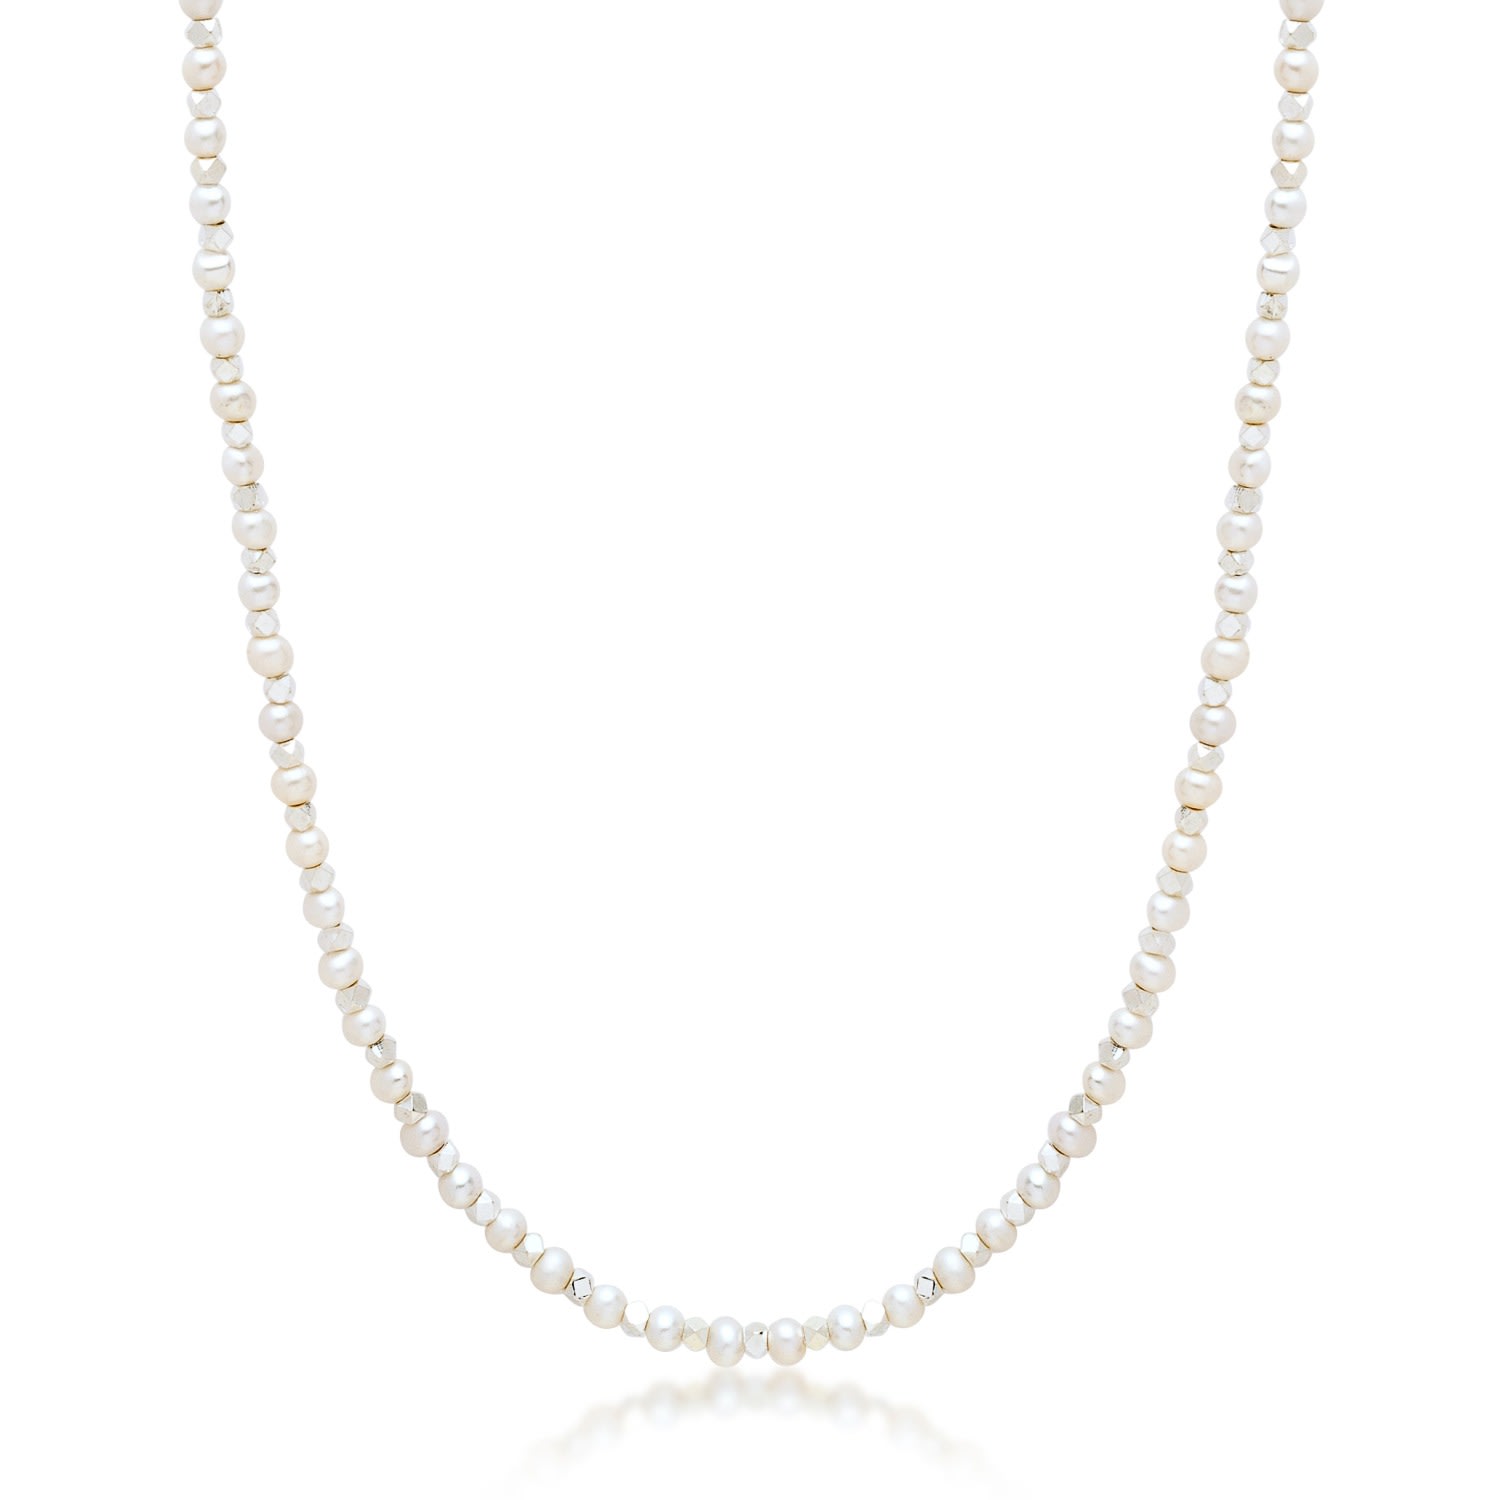 White / Silver Men's Mini Beaded Necklace With Pearls Nialaya